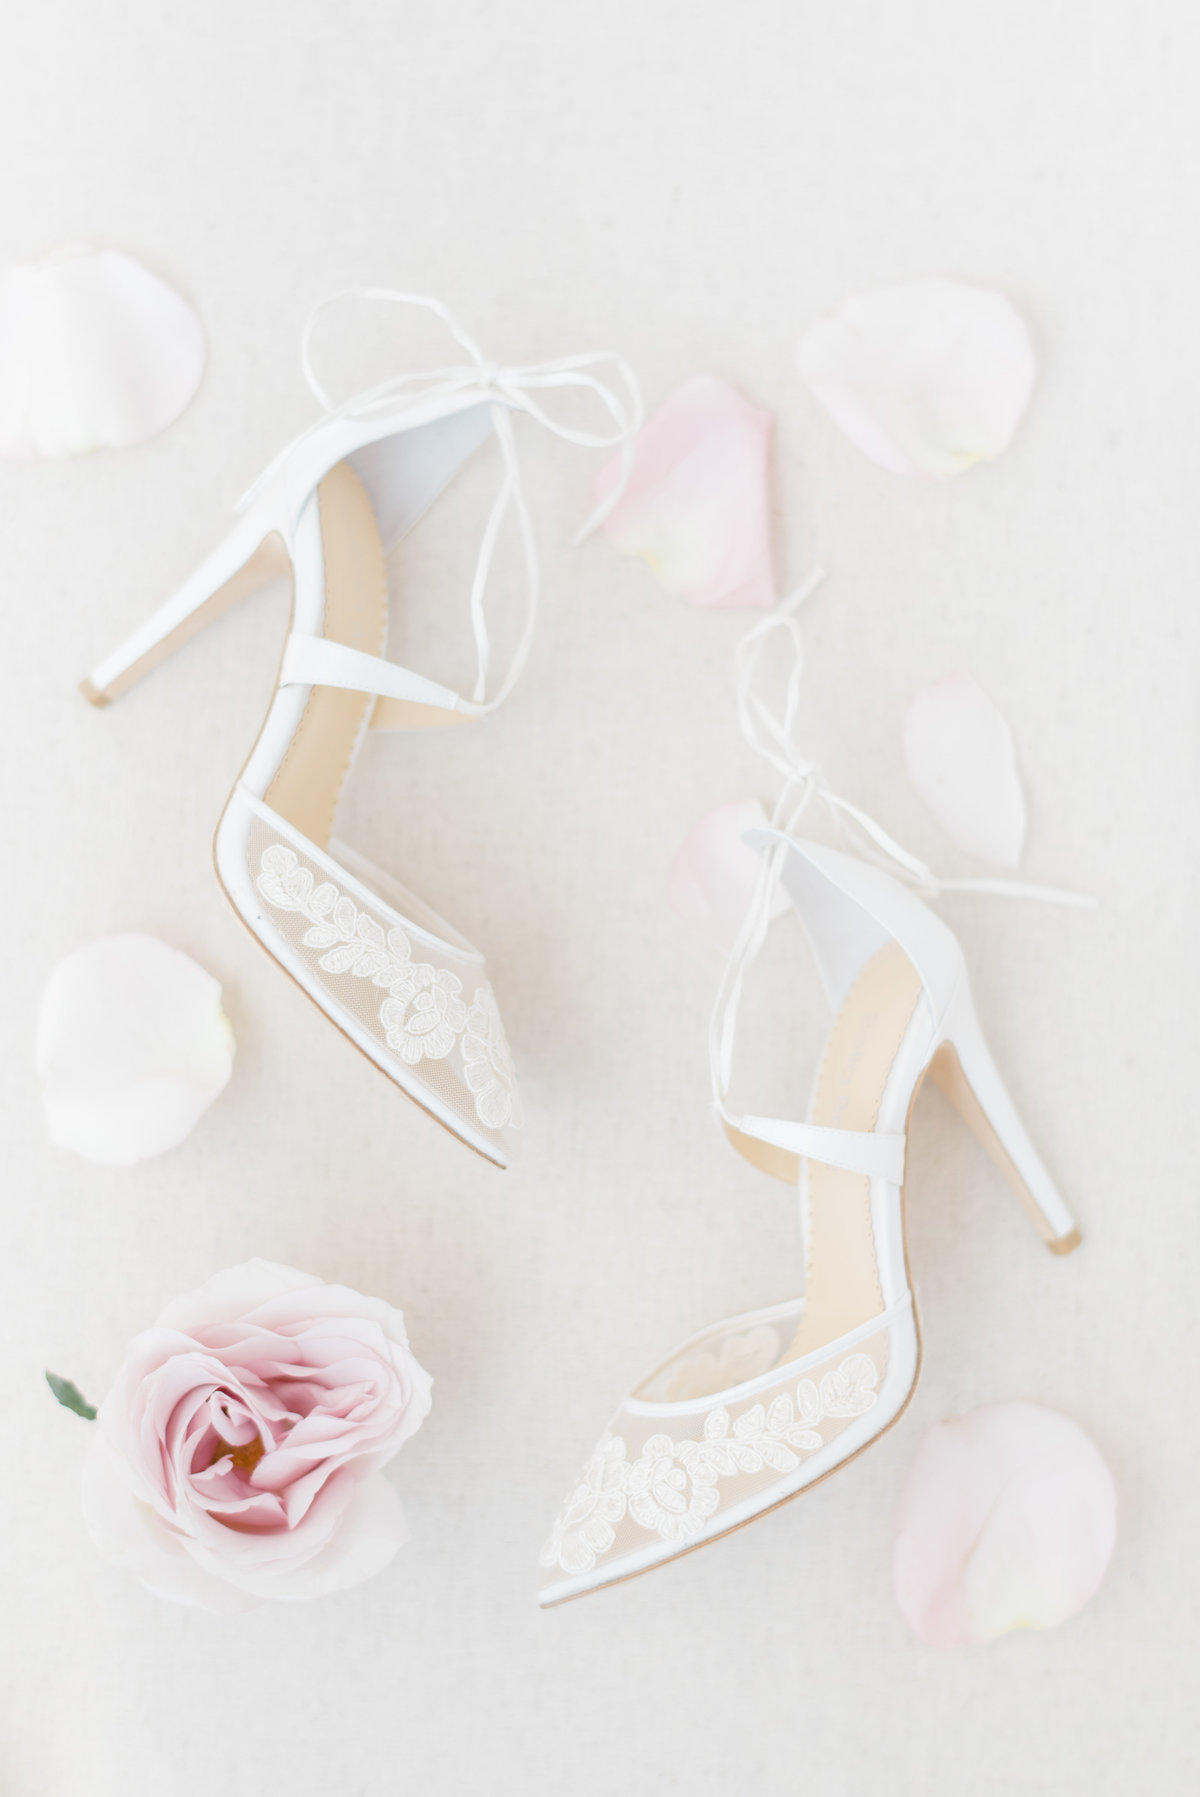 Brides-shoes-with-flowers-photograph